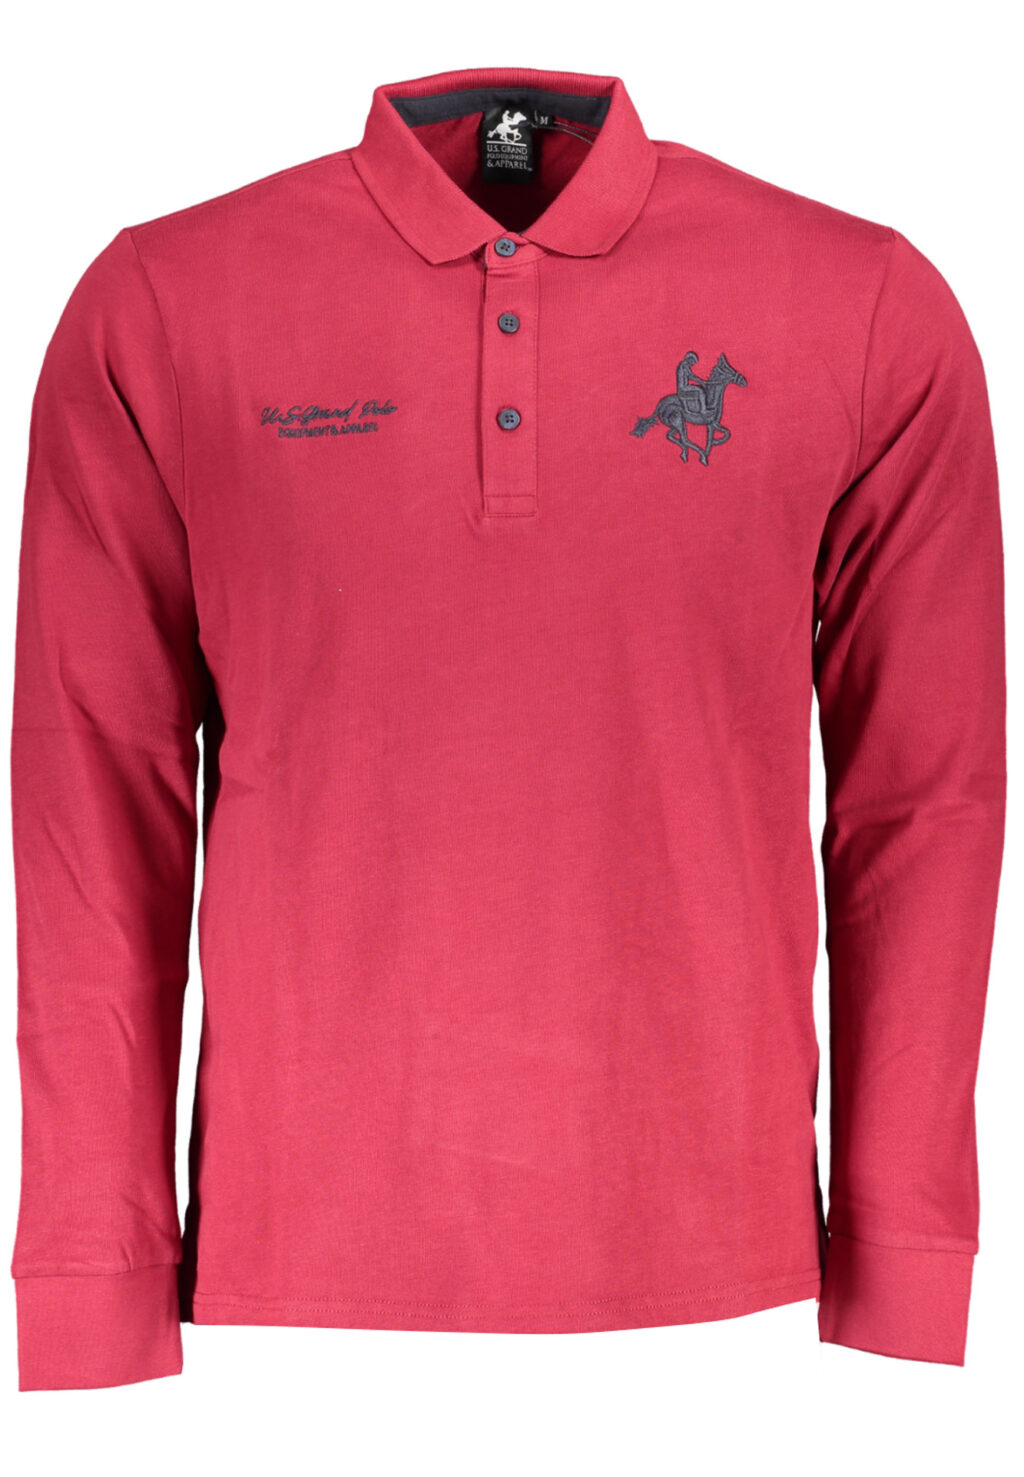 US GRAND POLO MEN'S LONG SLEEVED POLO SHIRT RED USP879_ROROSSO